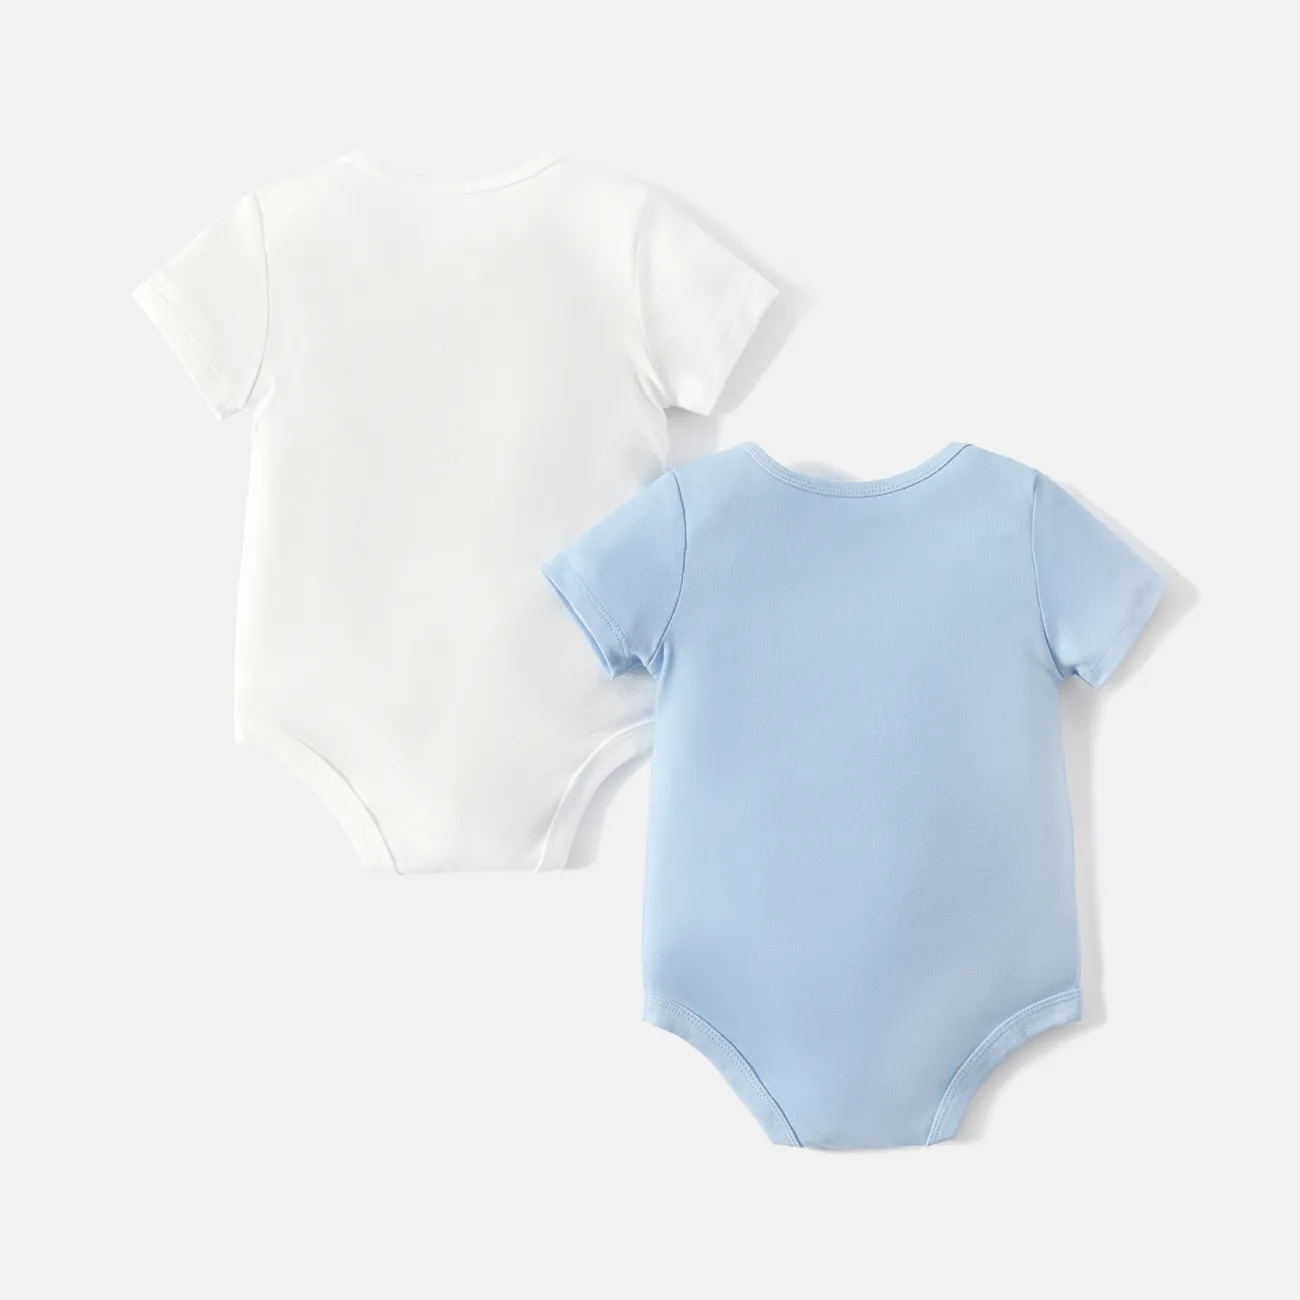 2-Pack Baby Girl/Boy 100% Cotton Solid Color Short-sleeve Rompers BLUE WHITE big image 1